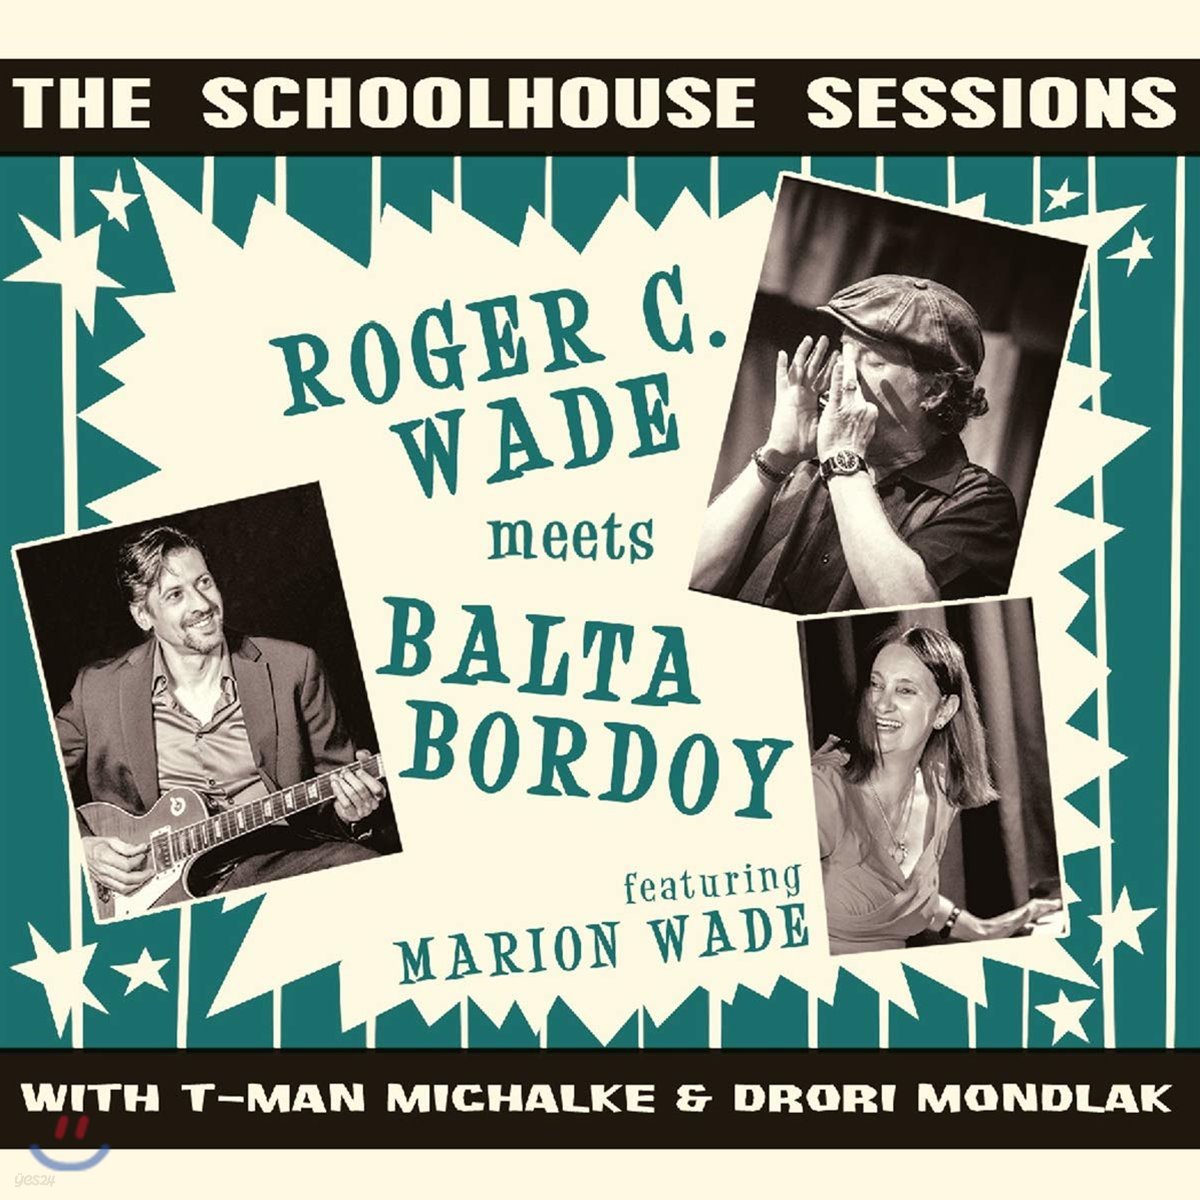 Roger C Wade &amp; Balta Bordoy - The Schoolhouse Sessions